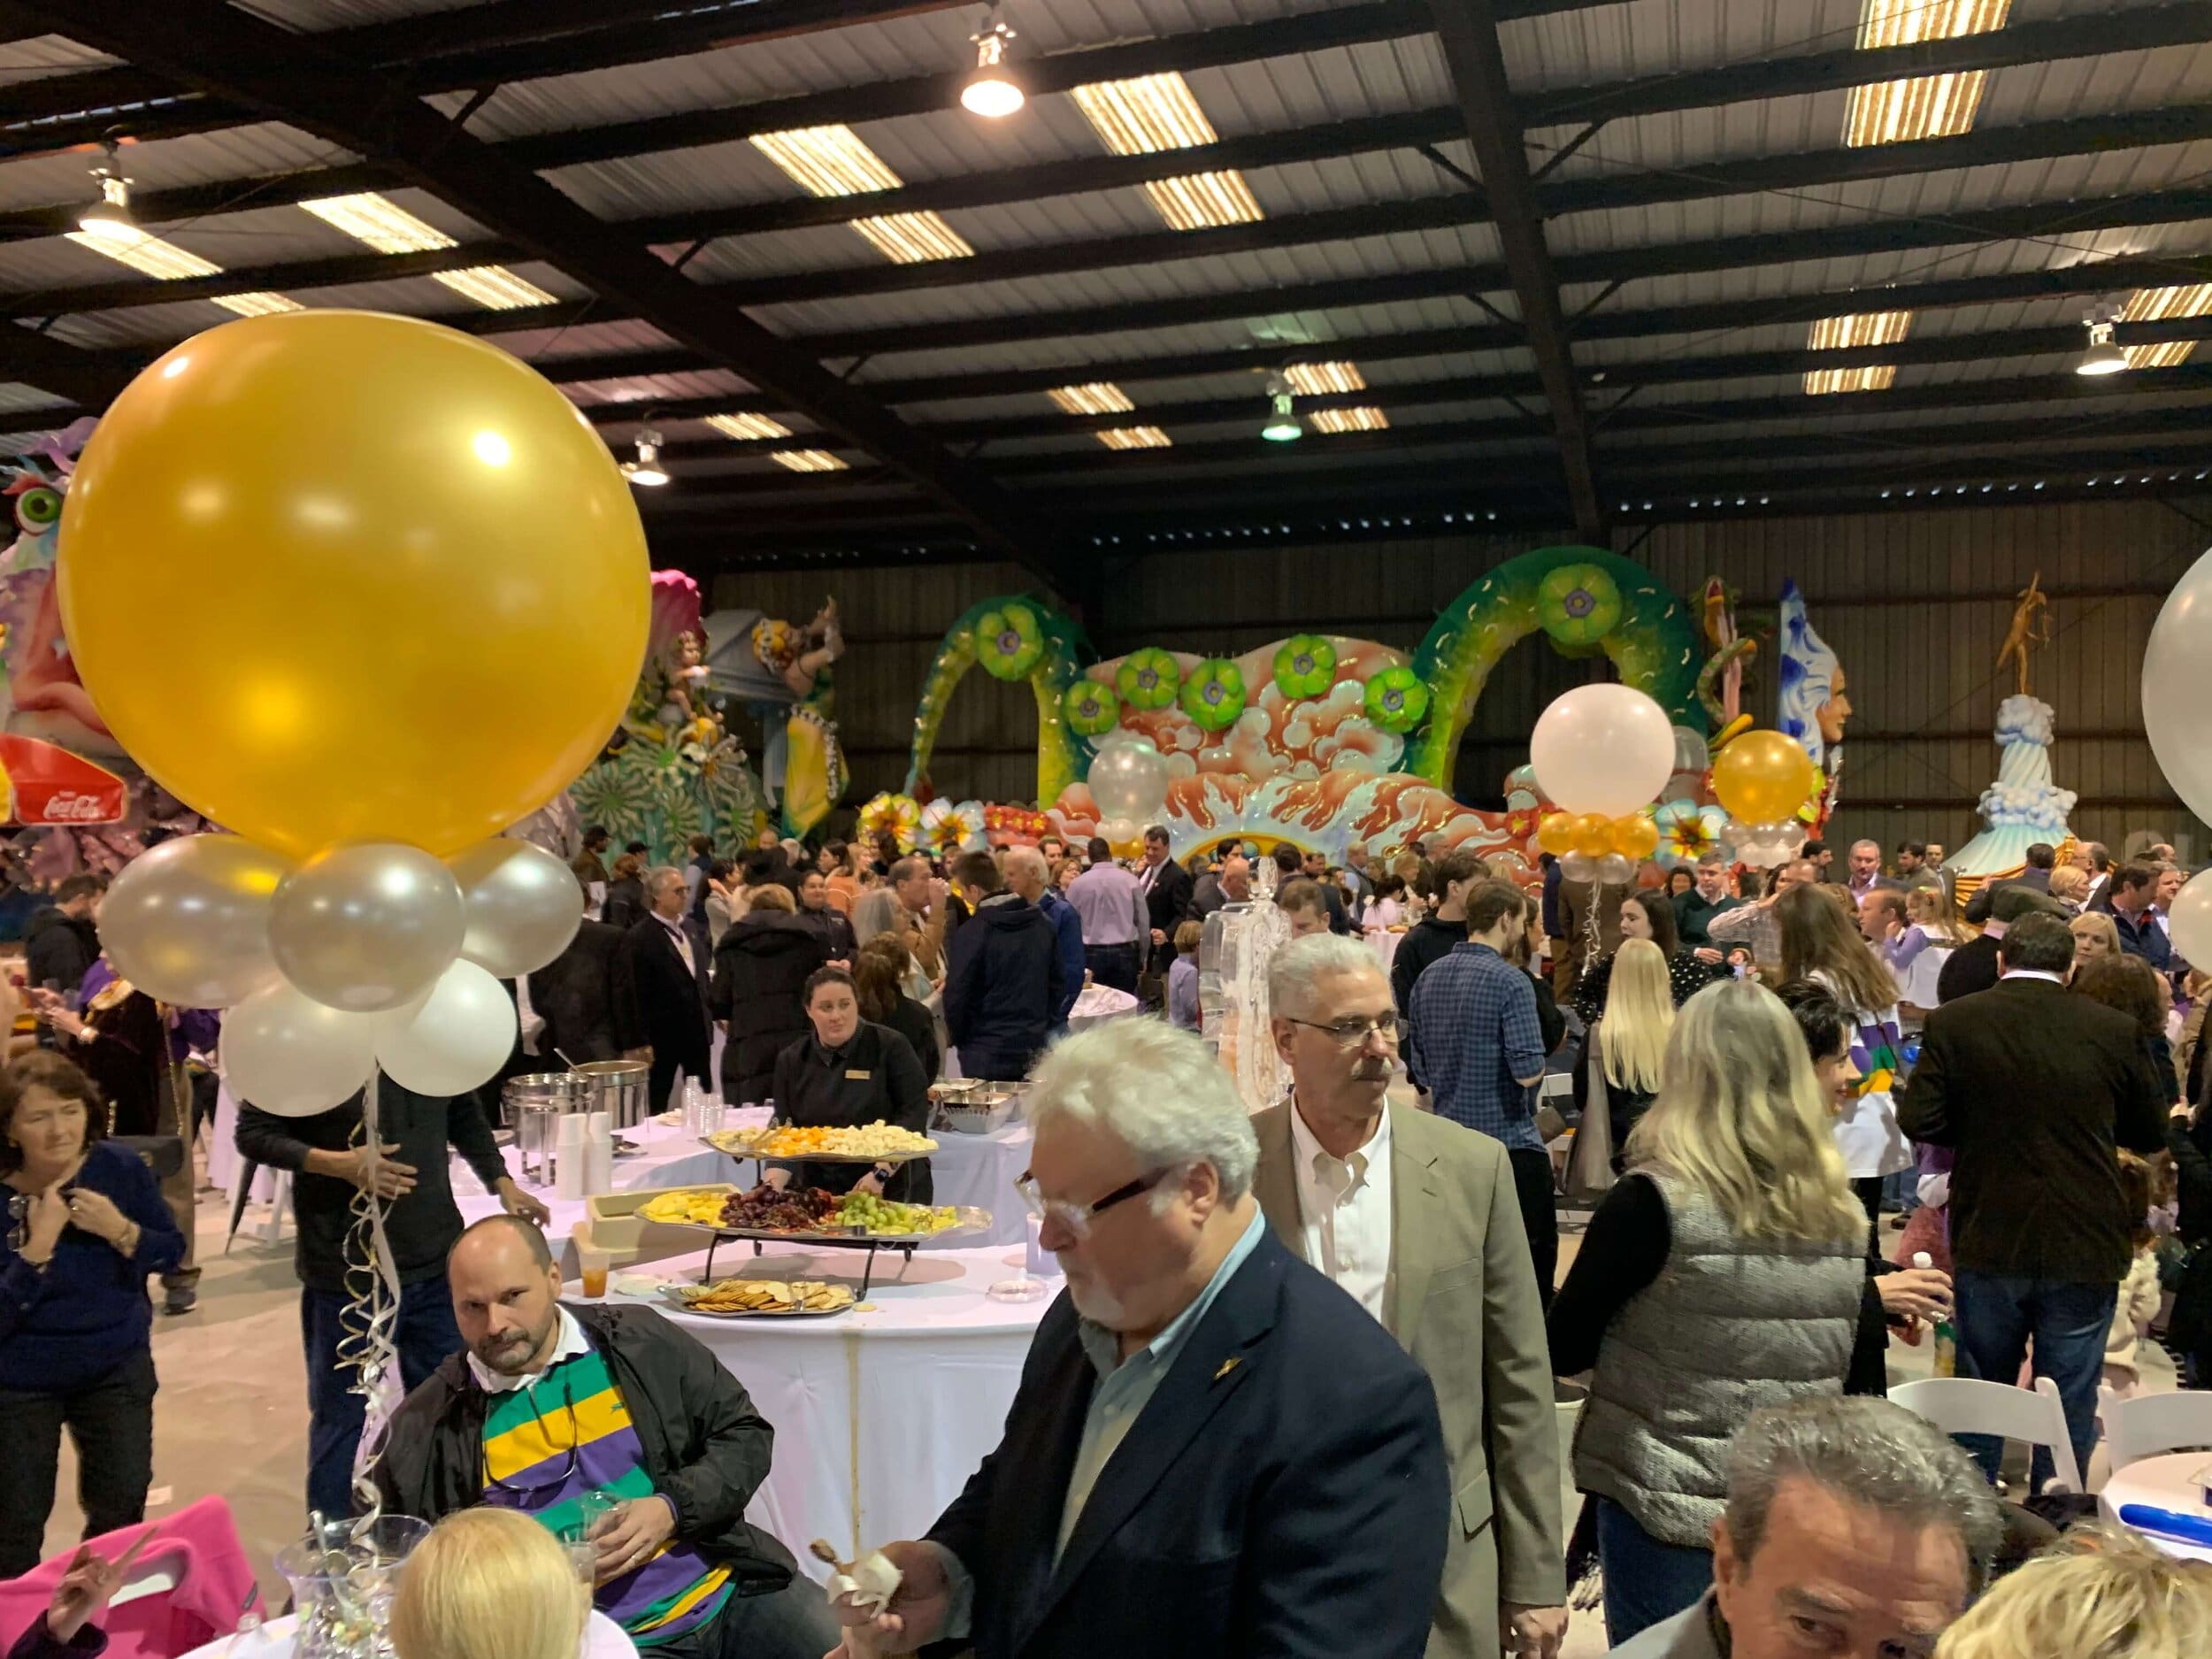 Guests at New Orleans Hermes Party event, with Mardi Gras floats and balloons